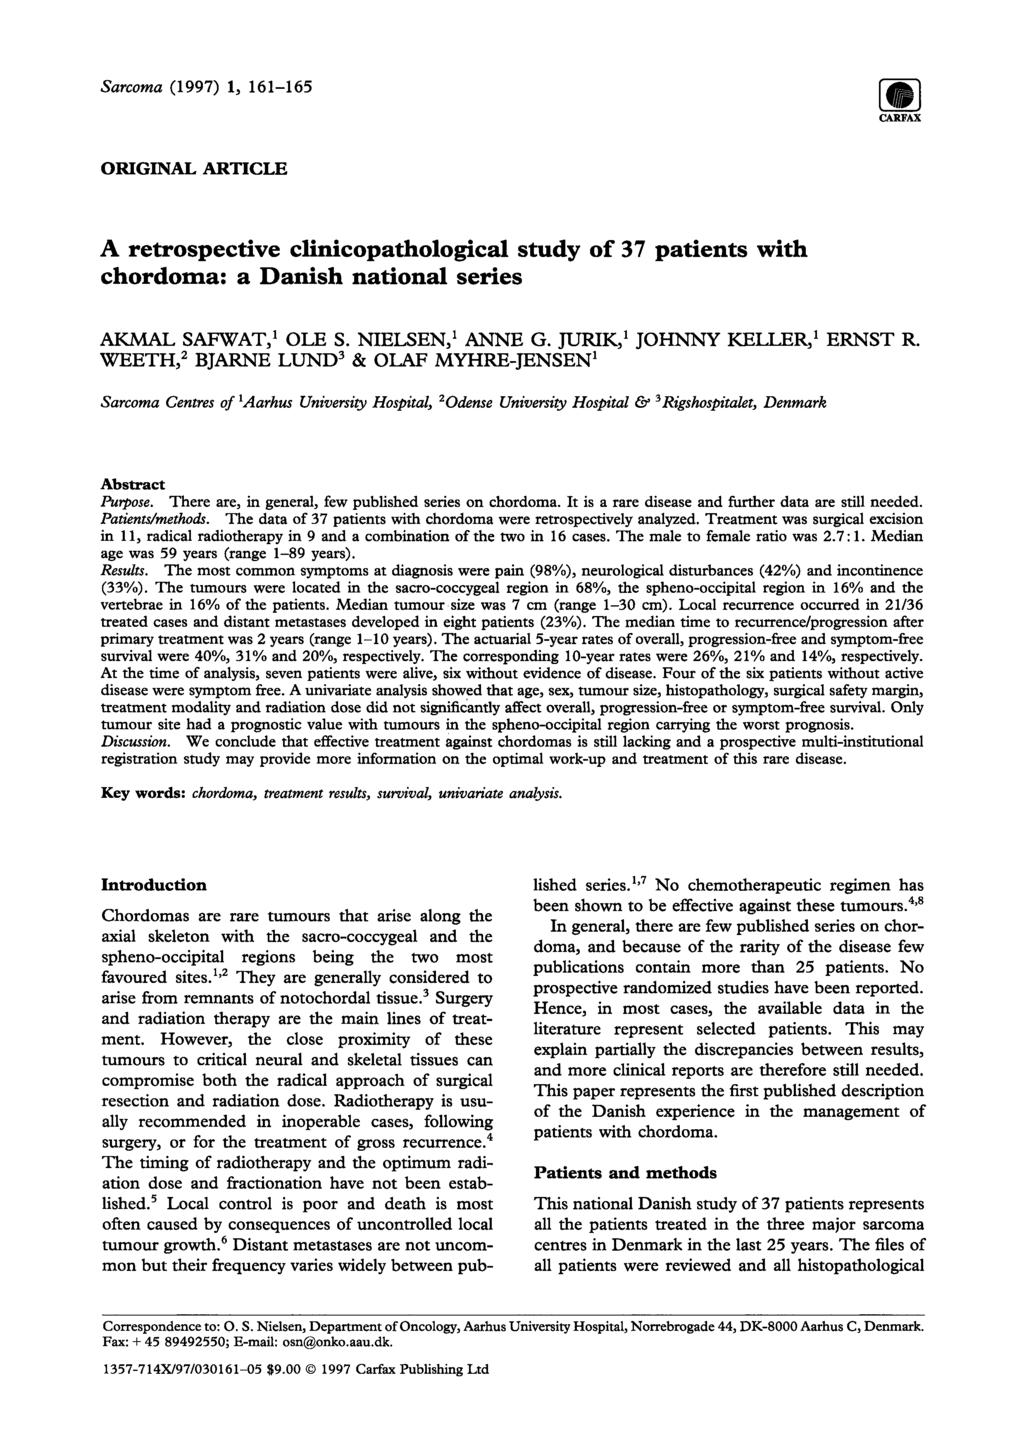 Sarcoma (1997) 1, 161-165 CARFAX ORIGINAL ARTICLE A retrospective clinicopathological study of 37 patients with chordoma: a Danish national series AKMAL SAFWAT, 10LE S. NIELSEN, ANNE G.